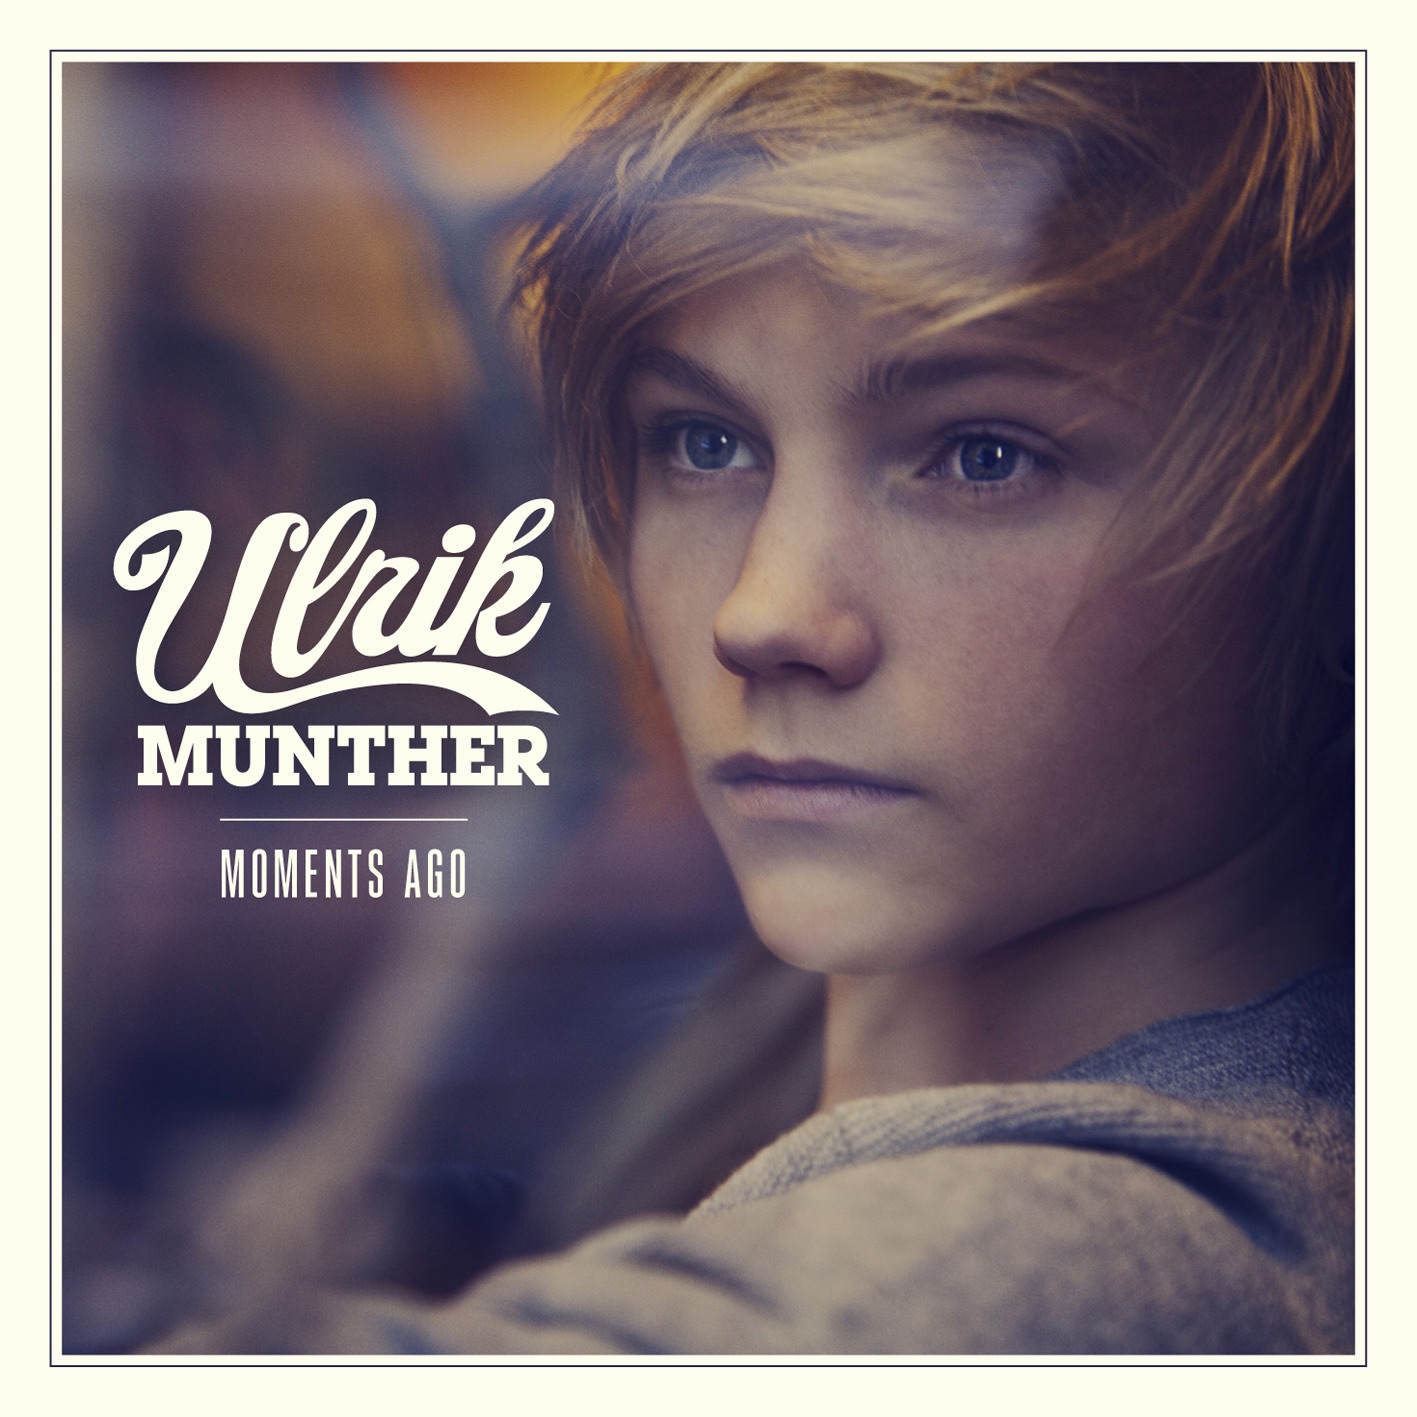 Ulrik Munther Moments Ago cover artwork